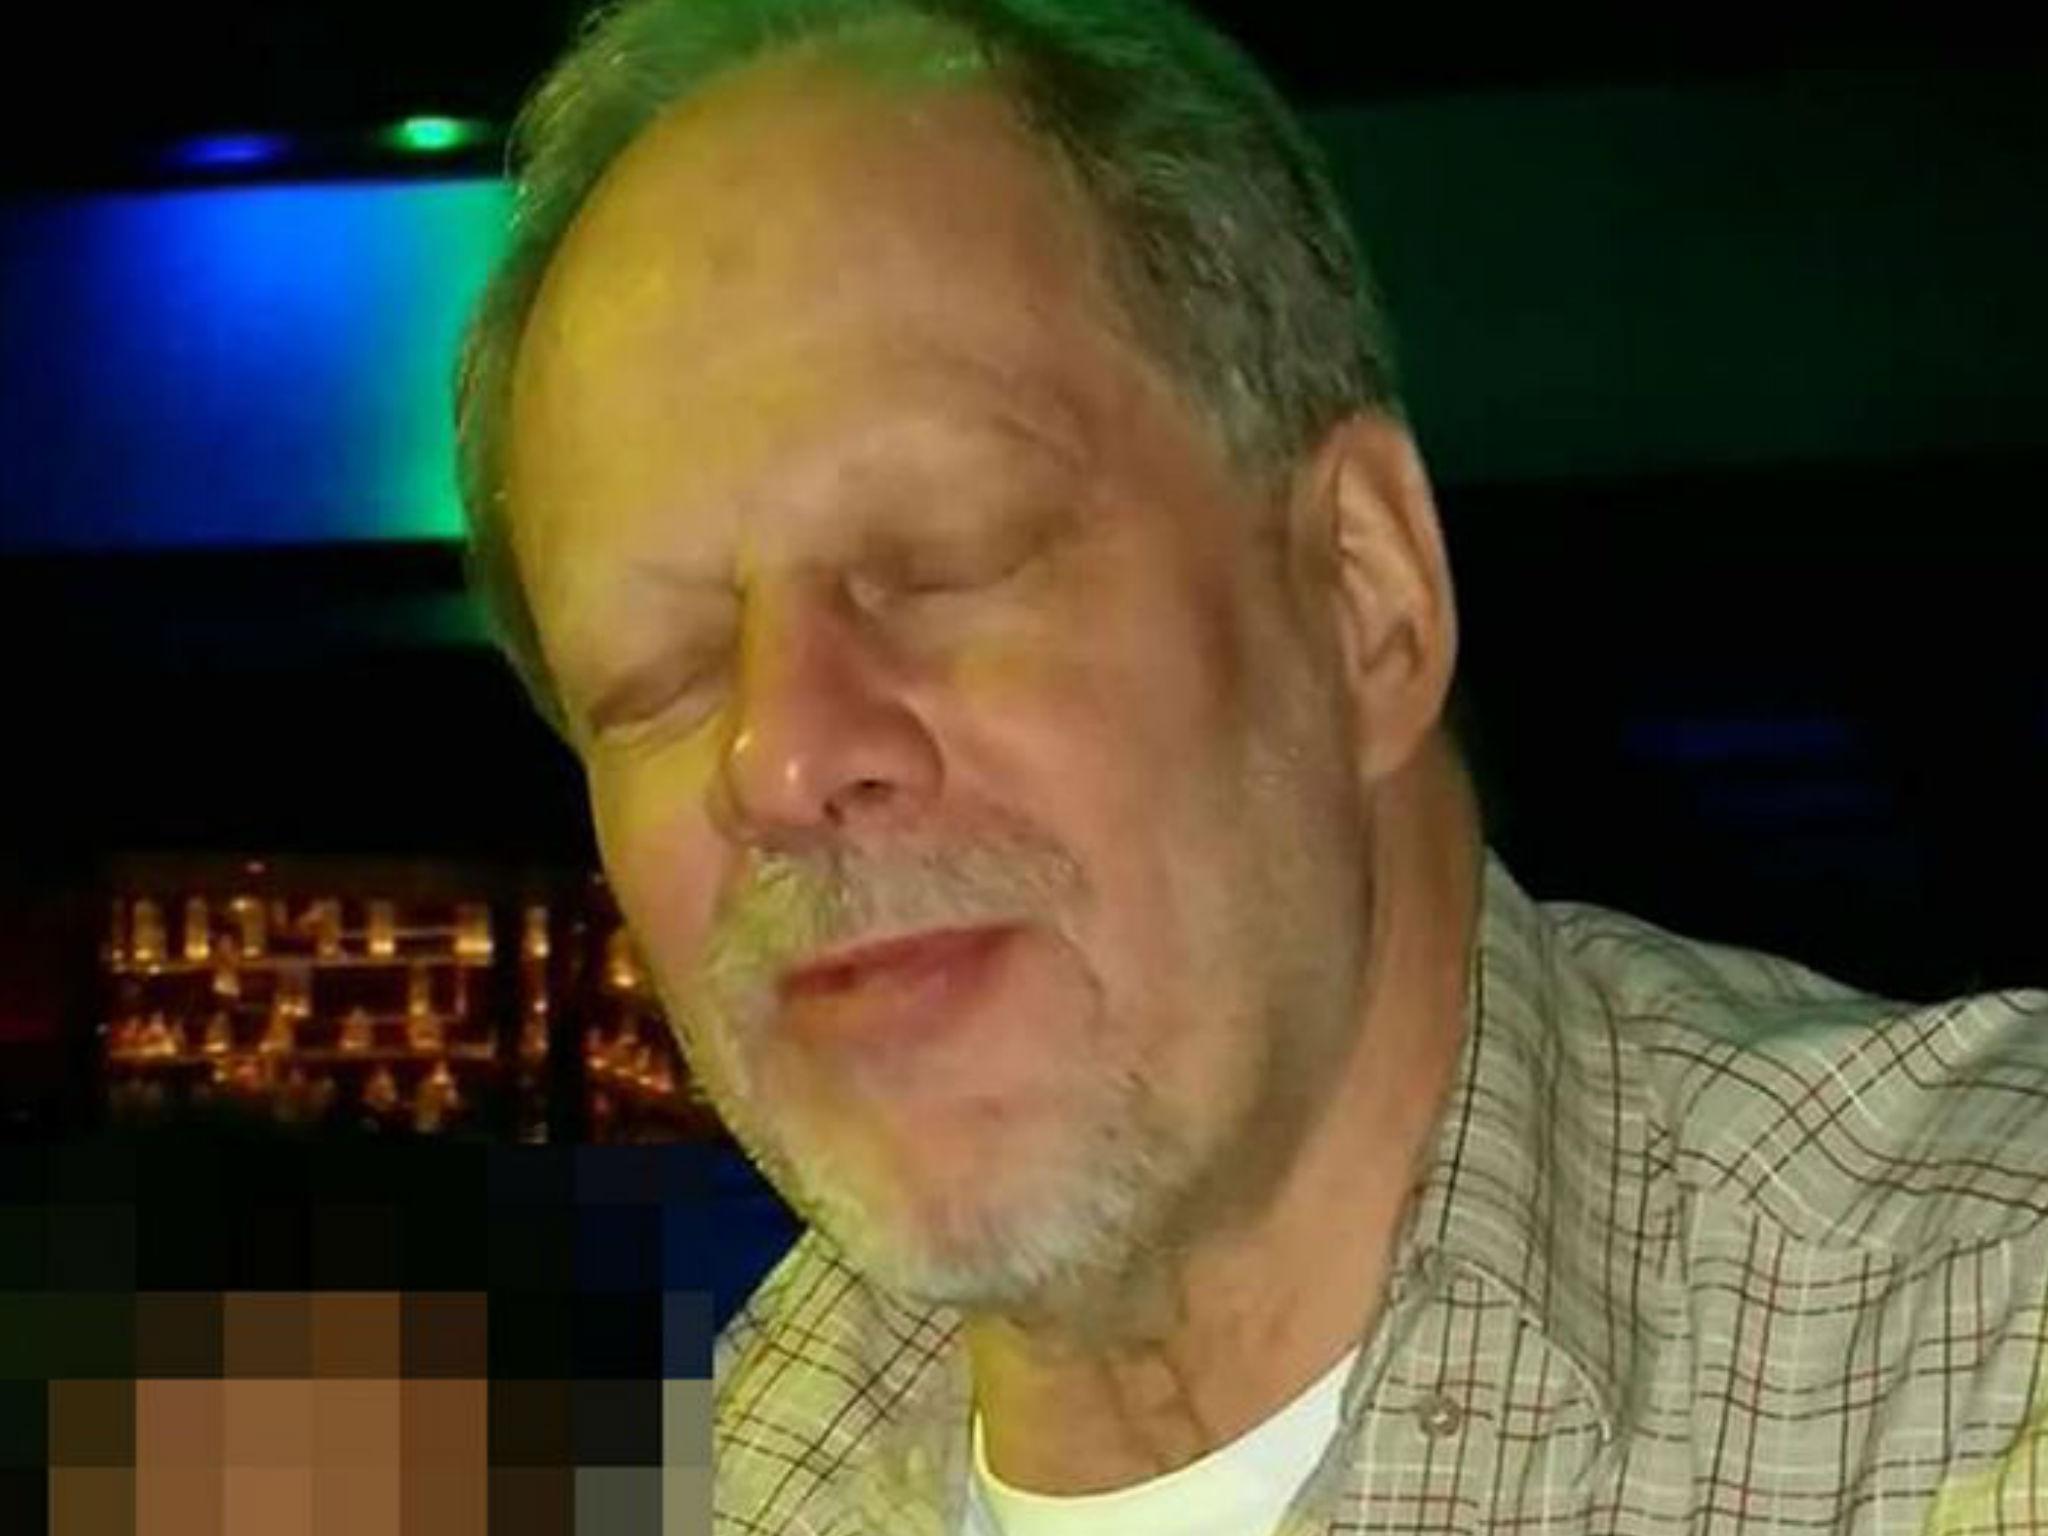 The first photo to eimerge of Stephen Paddock